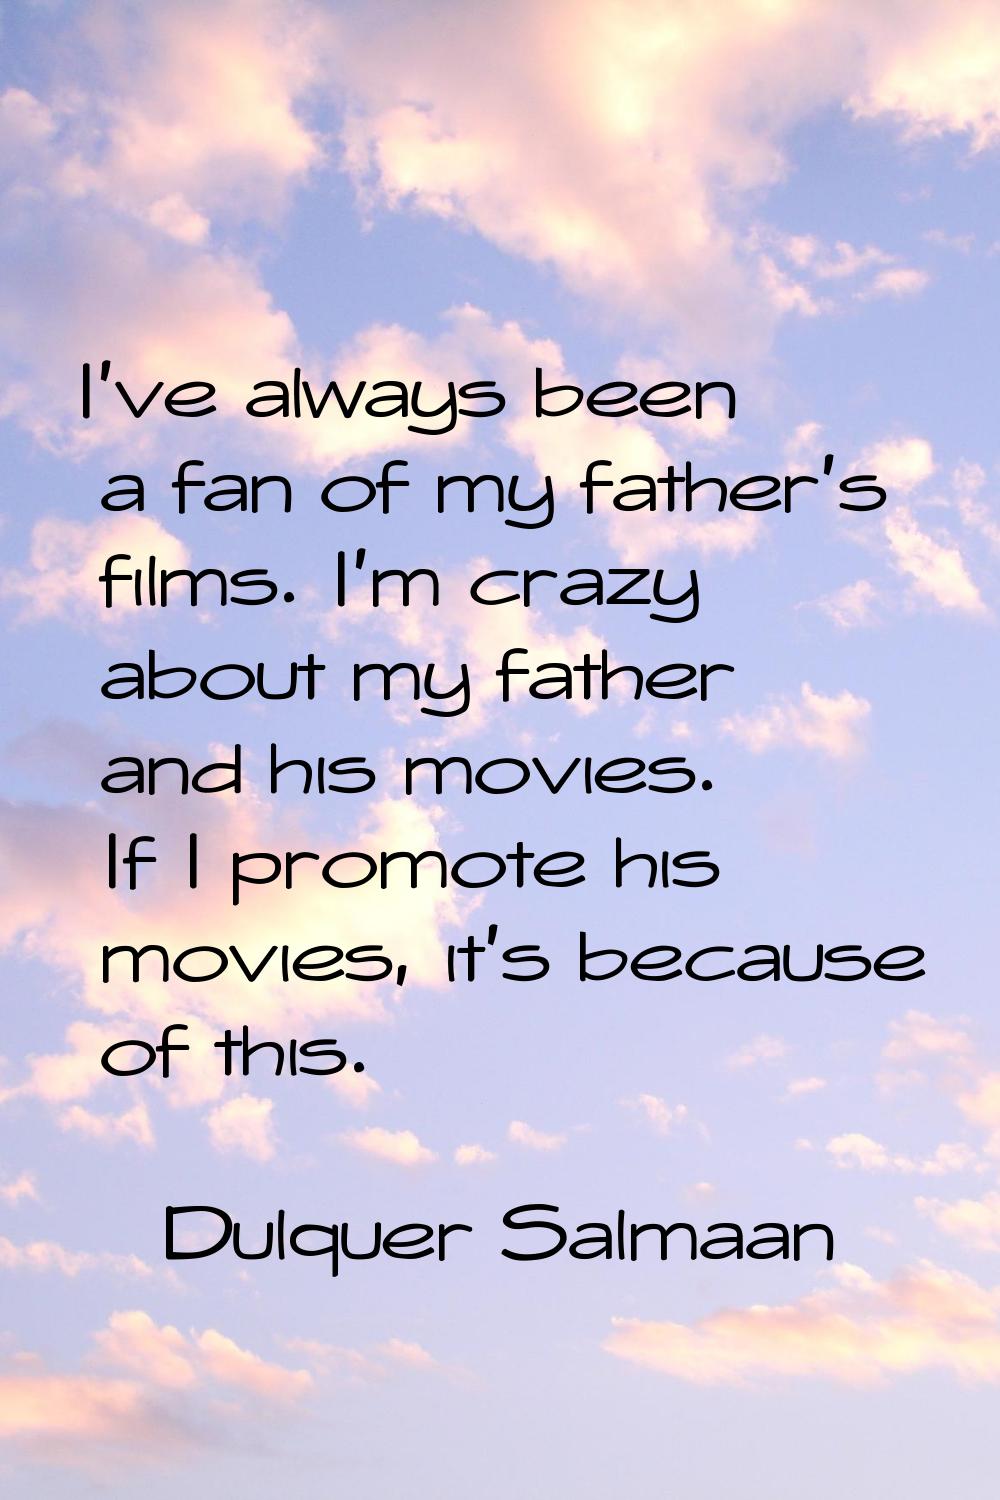 I've always been a fan of my father's films. I'm crazy about my father and his movies. If I promote